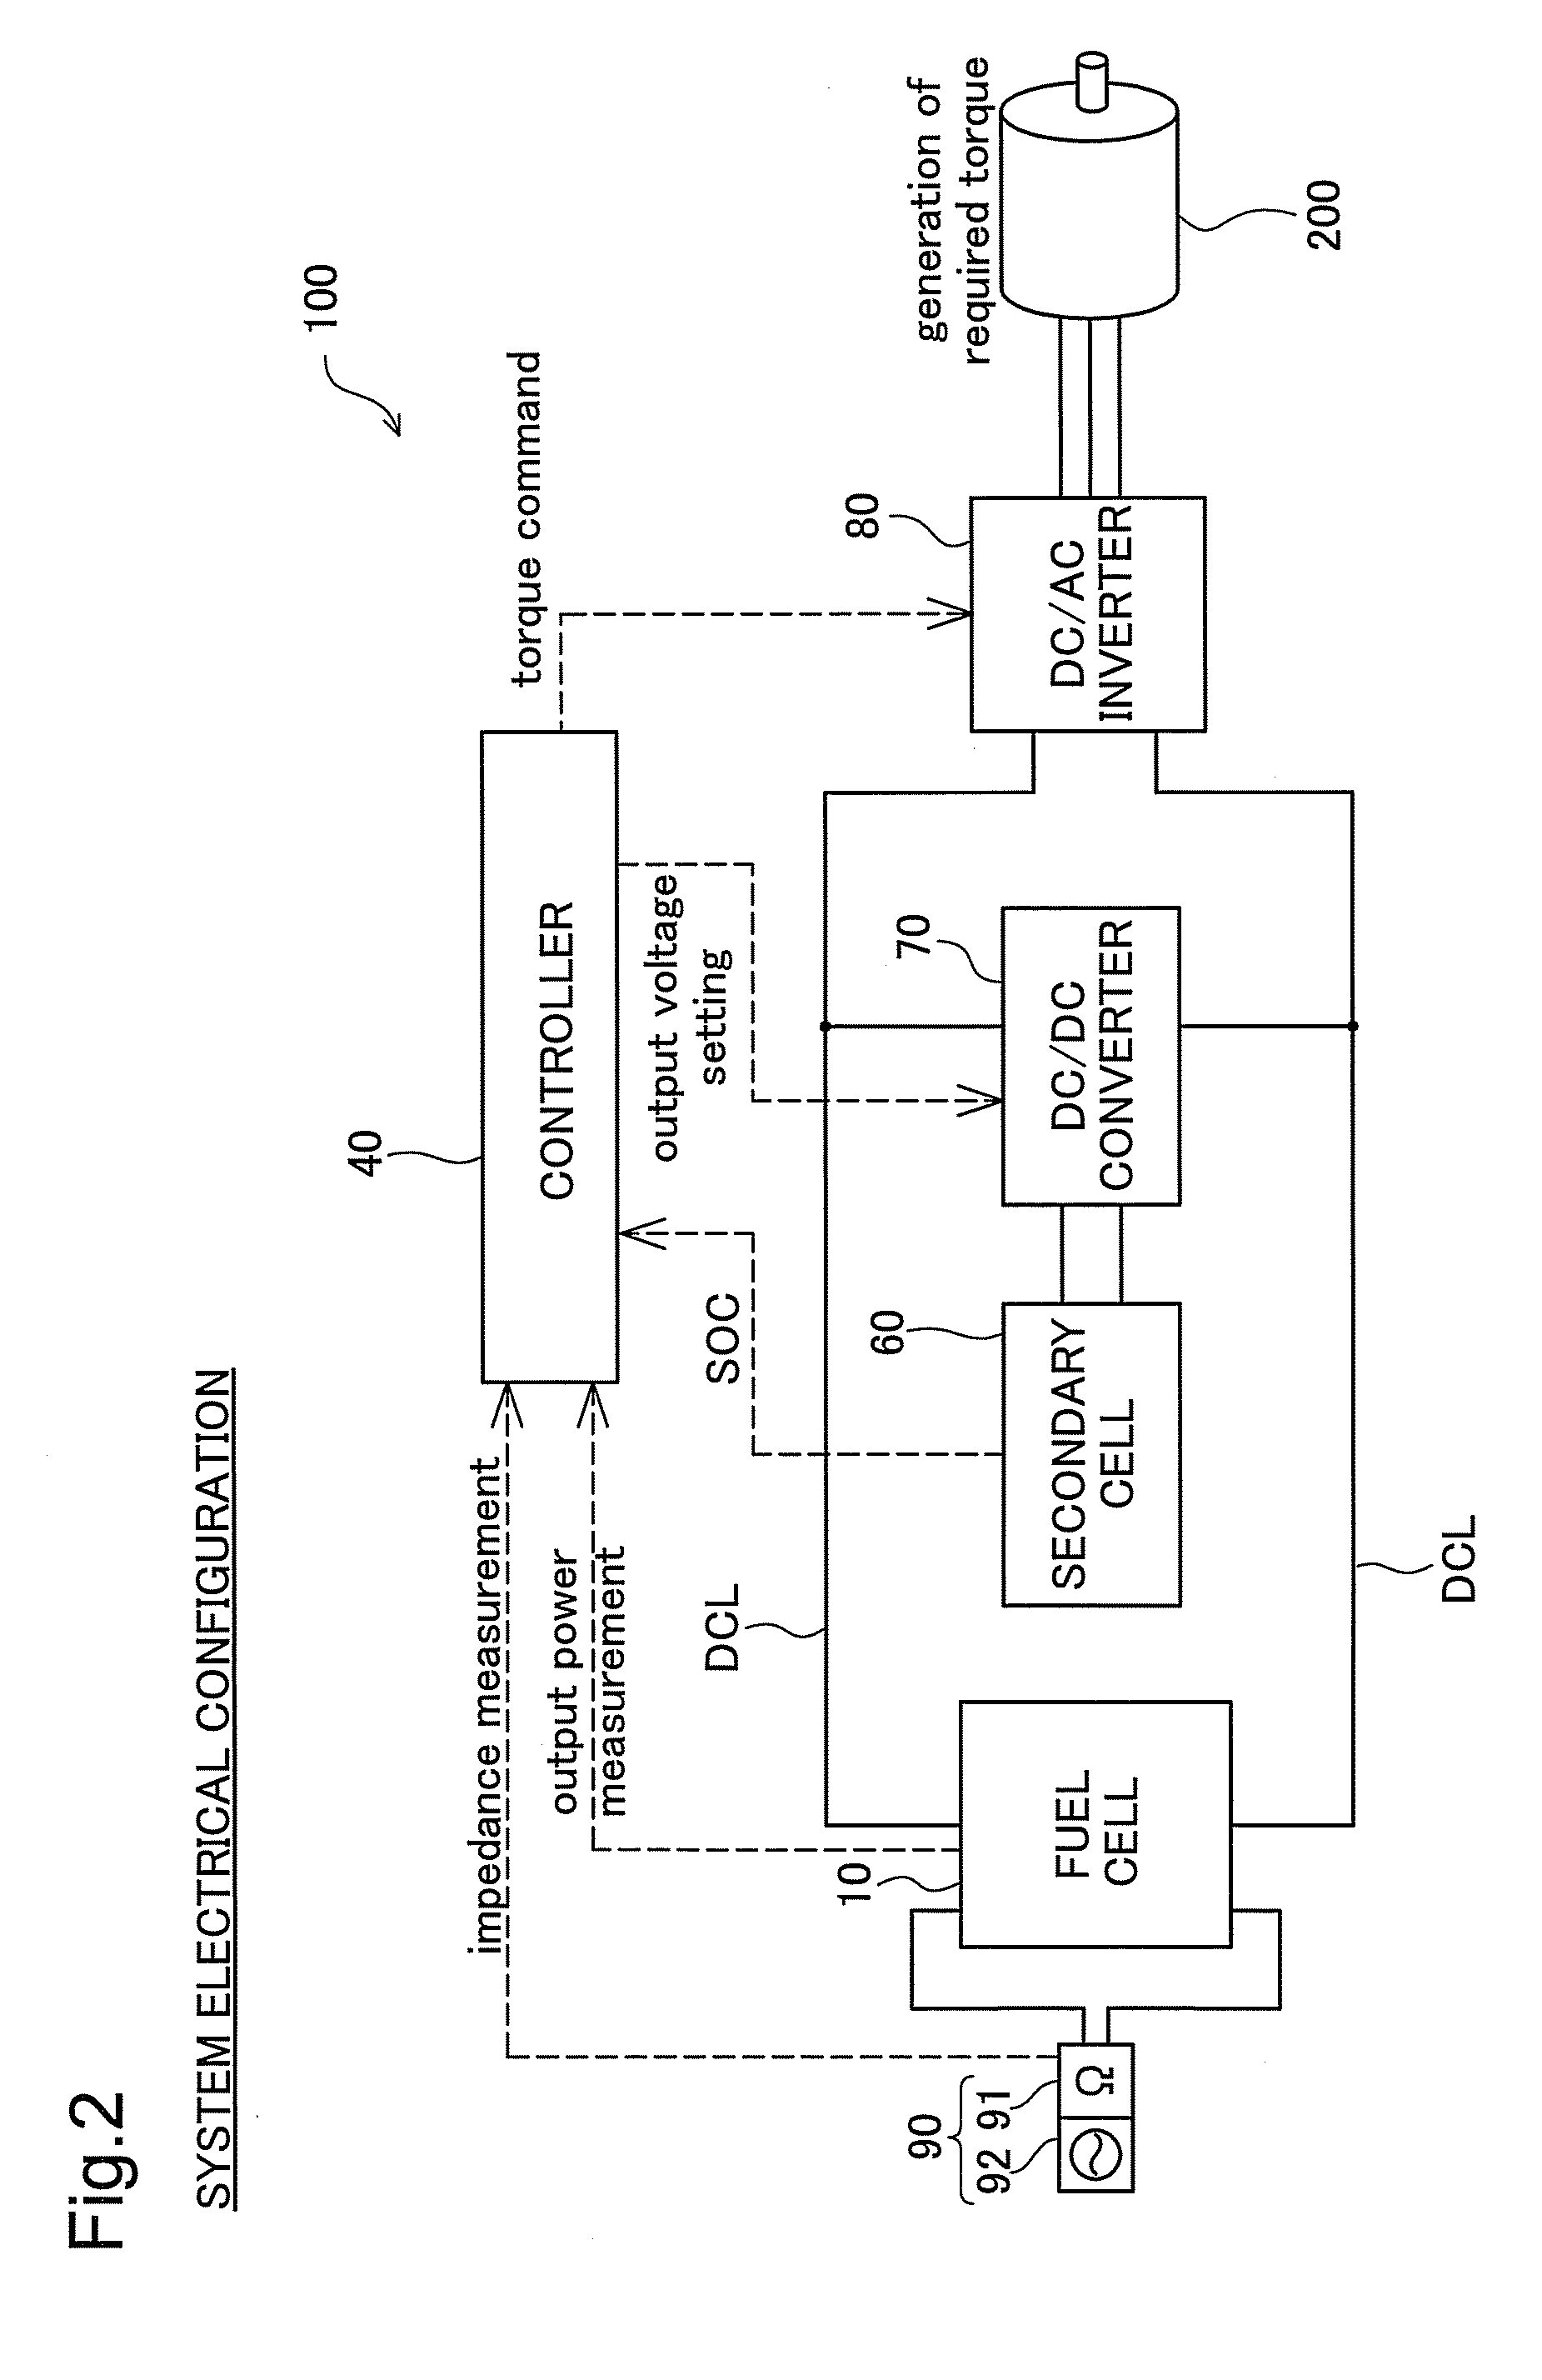 Fuel cell system and method of controlling the same